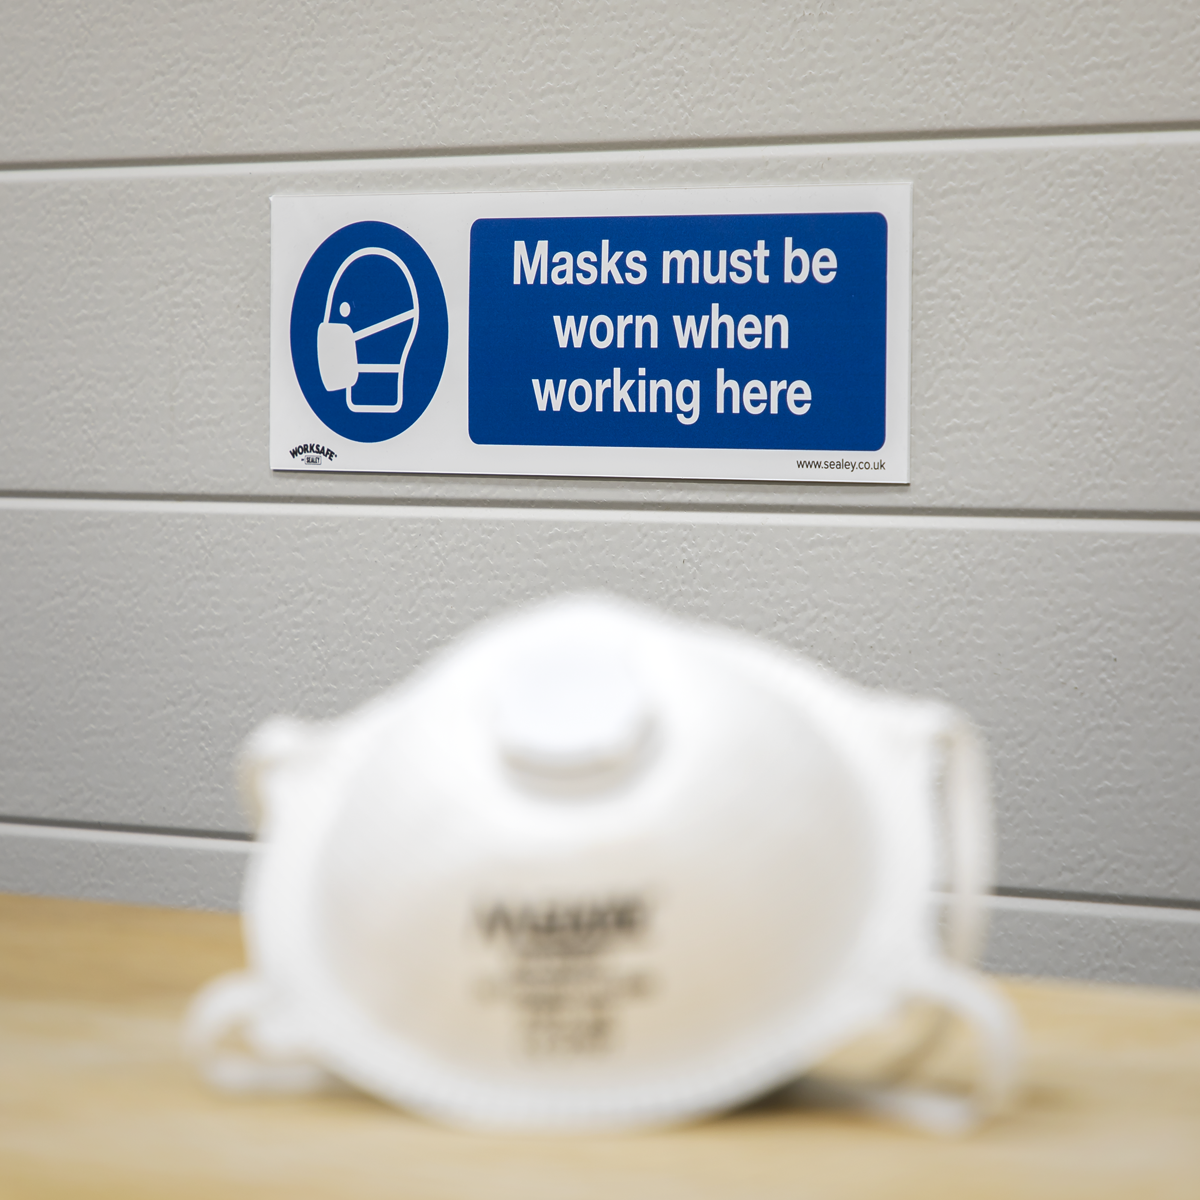 Mandatory Safety Sign - Masks Must Be Worn - Self-Adhesive Vinyl - Pack of 10